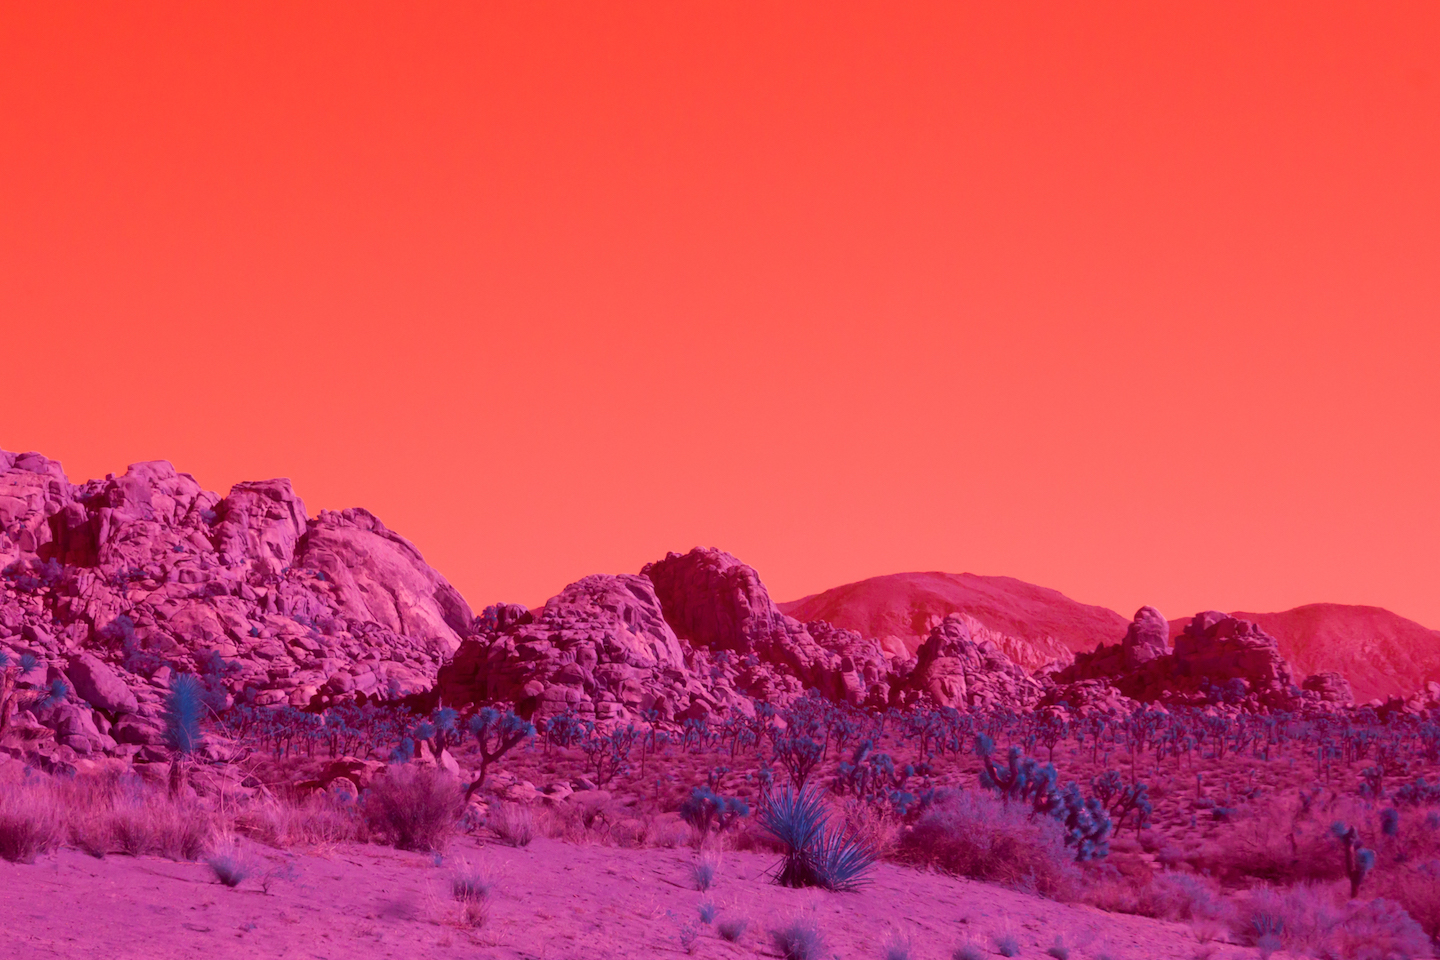 Psychedelic Photos From the Californian Desert - VICE